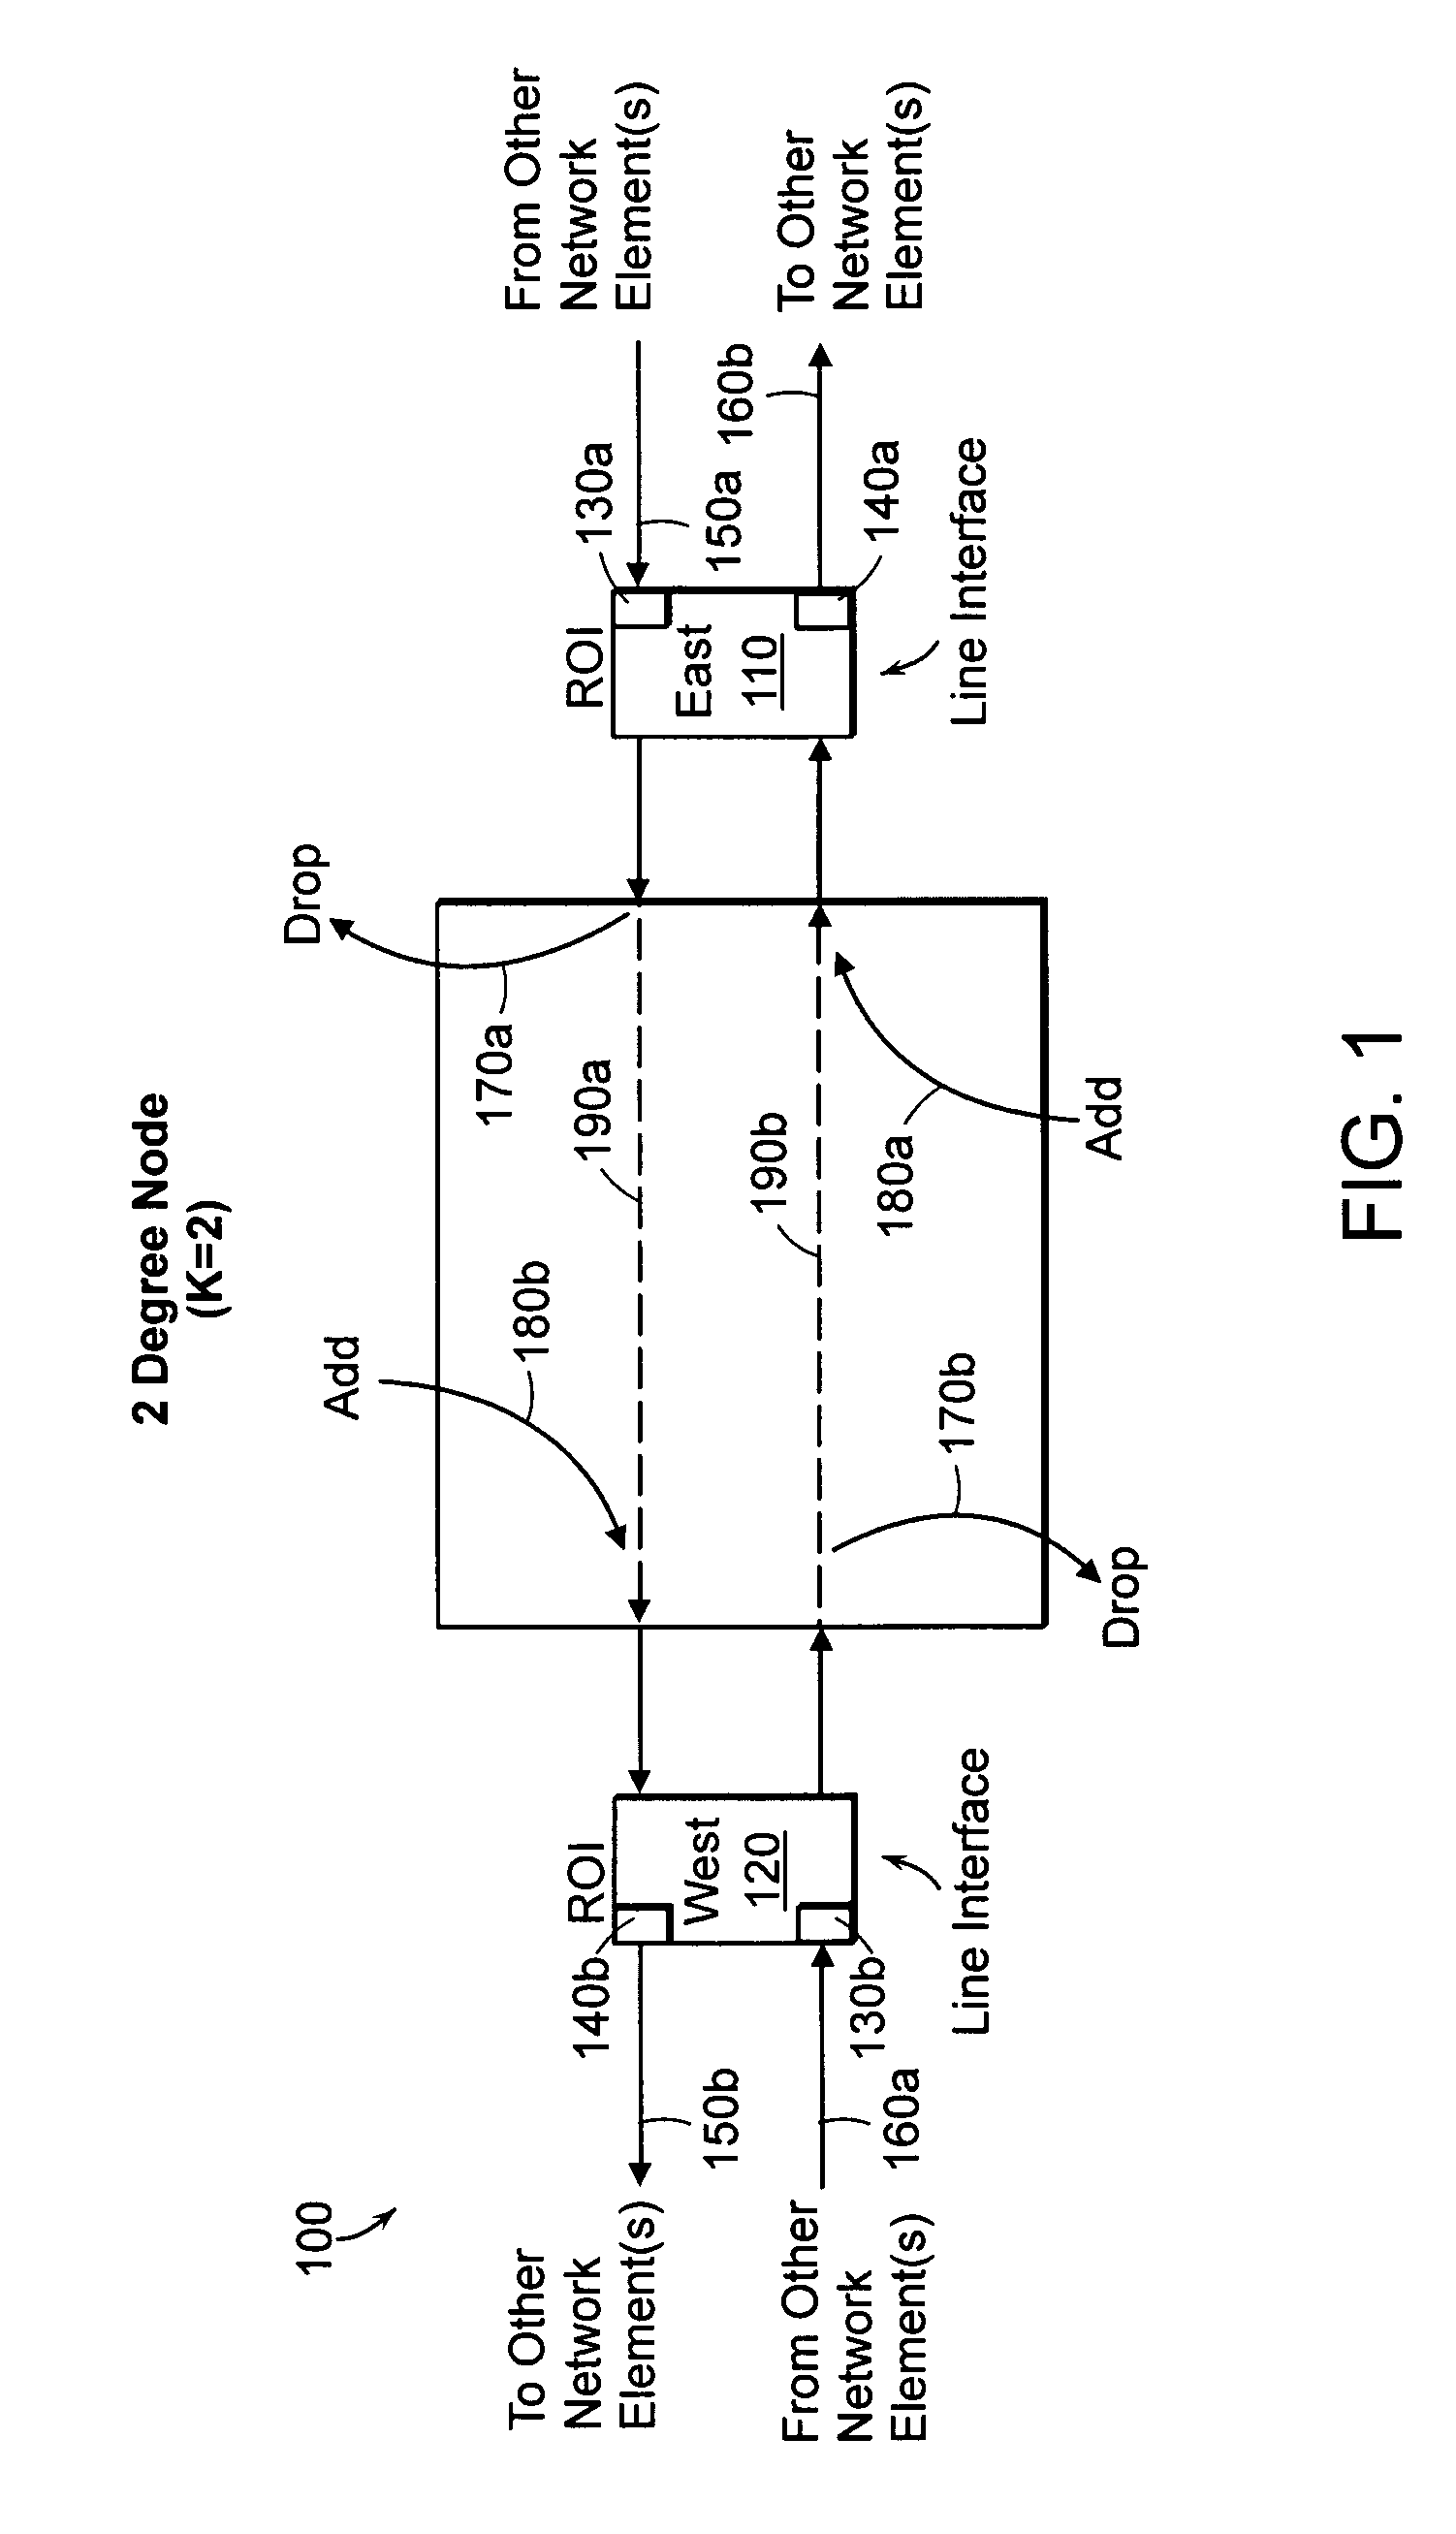 System and method for re-using wavelengths in an optical network